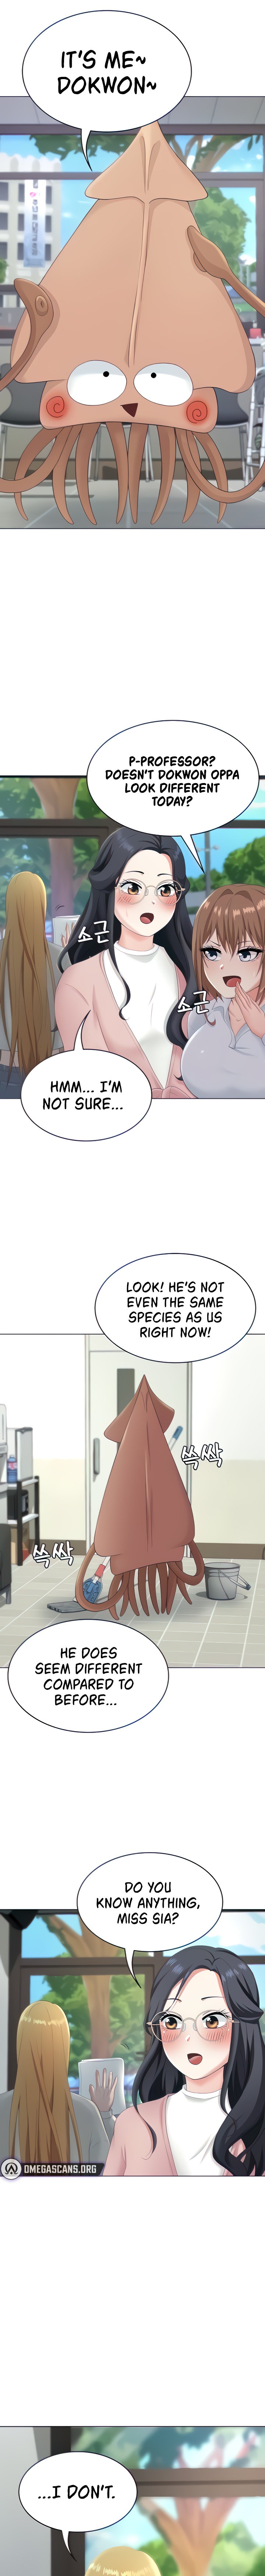 Seoul Kids These Days - Chapter 13 Page 9